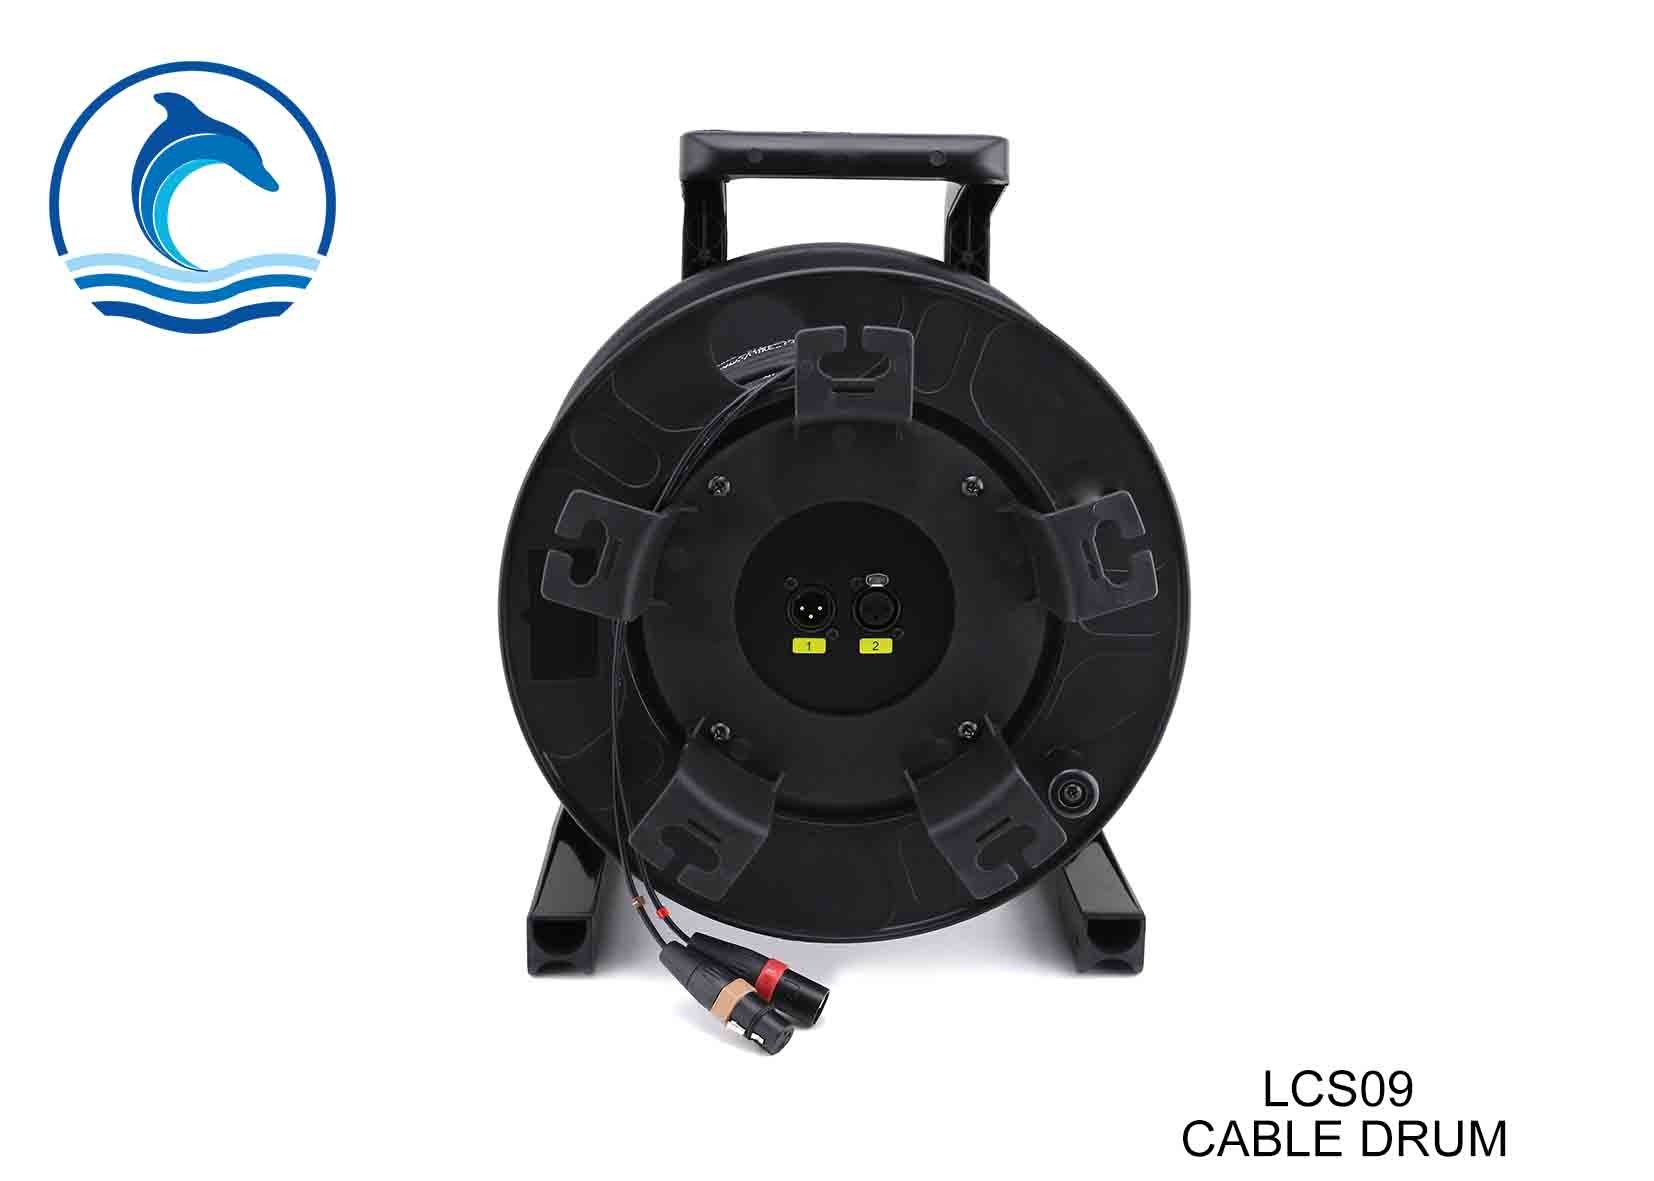 Best Portable Empty Cable Drum 8 - 40 Channels Snake Cable Drum / Cable Reel LCS09 wholesale